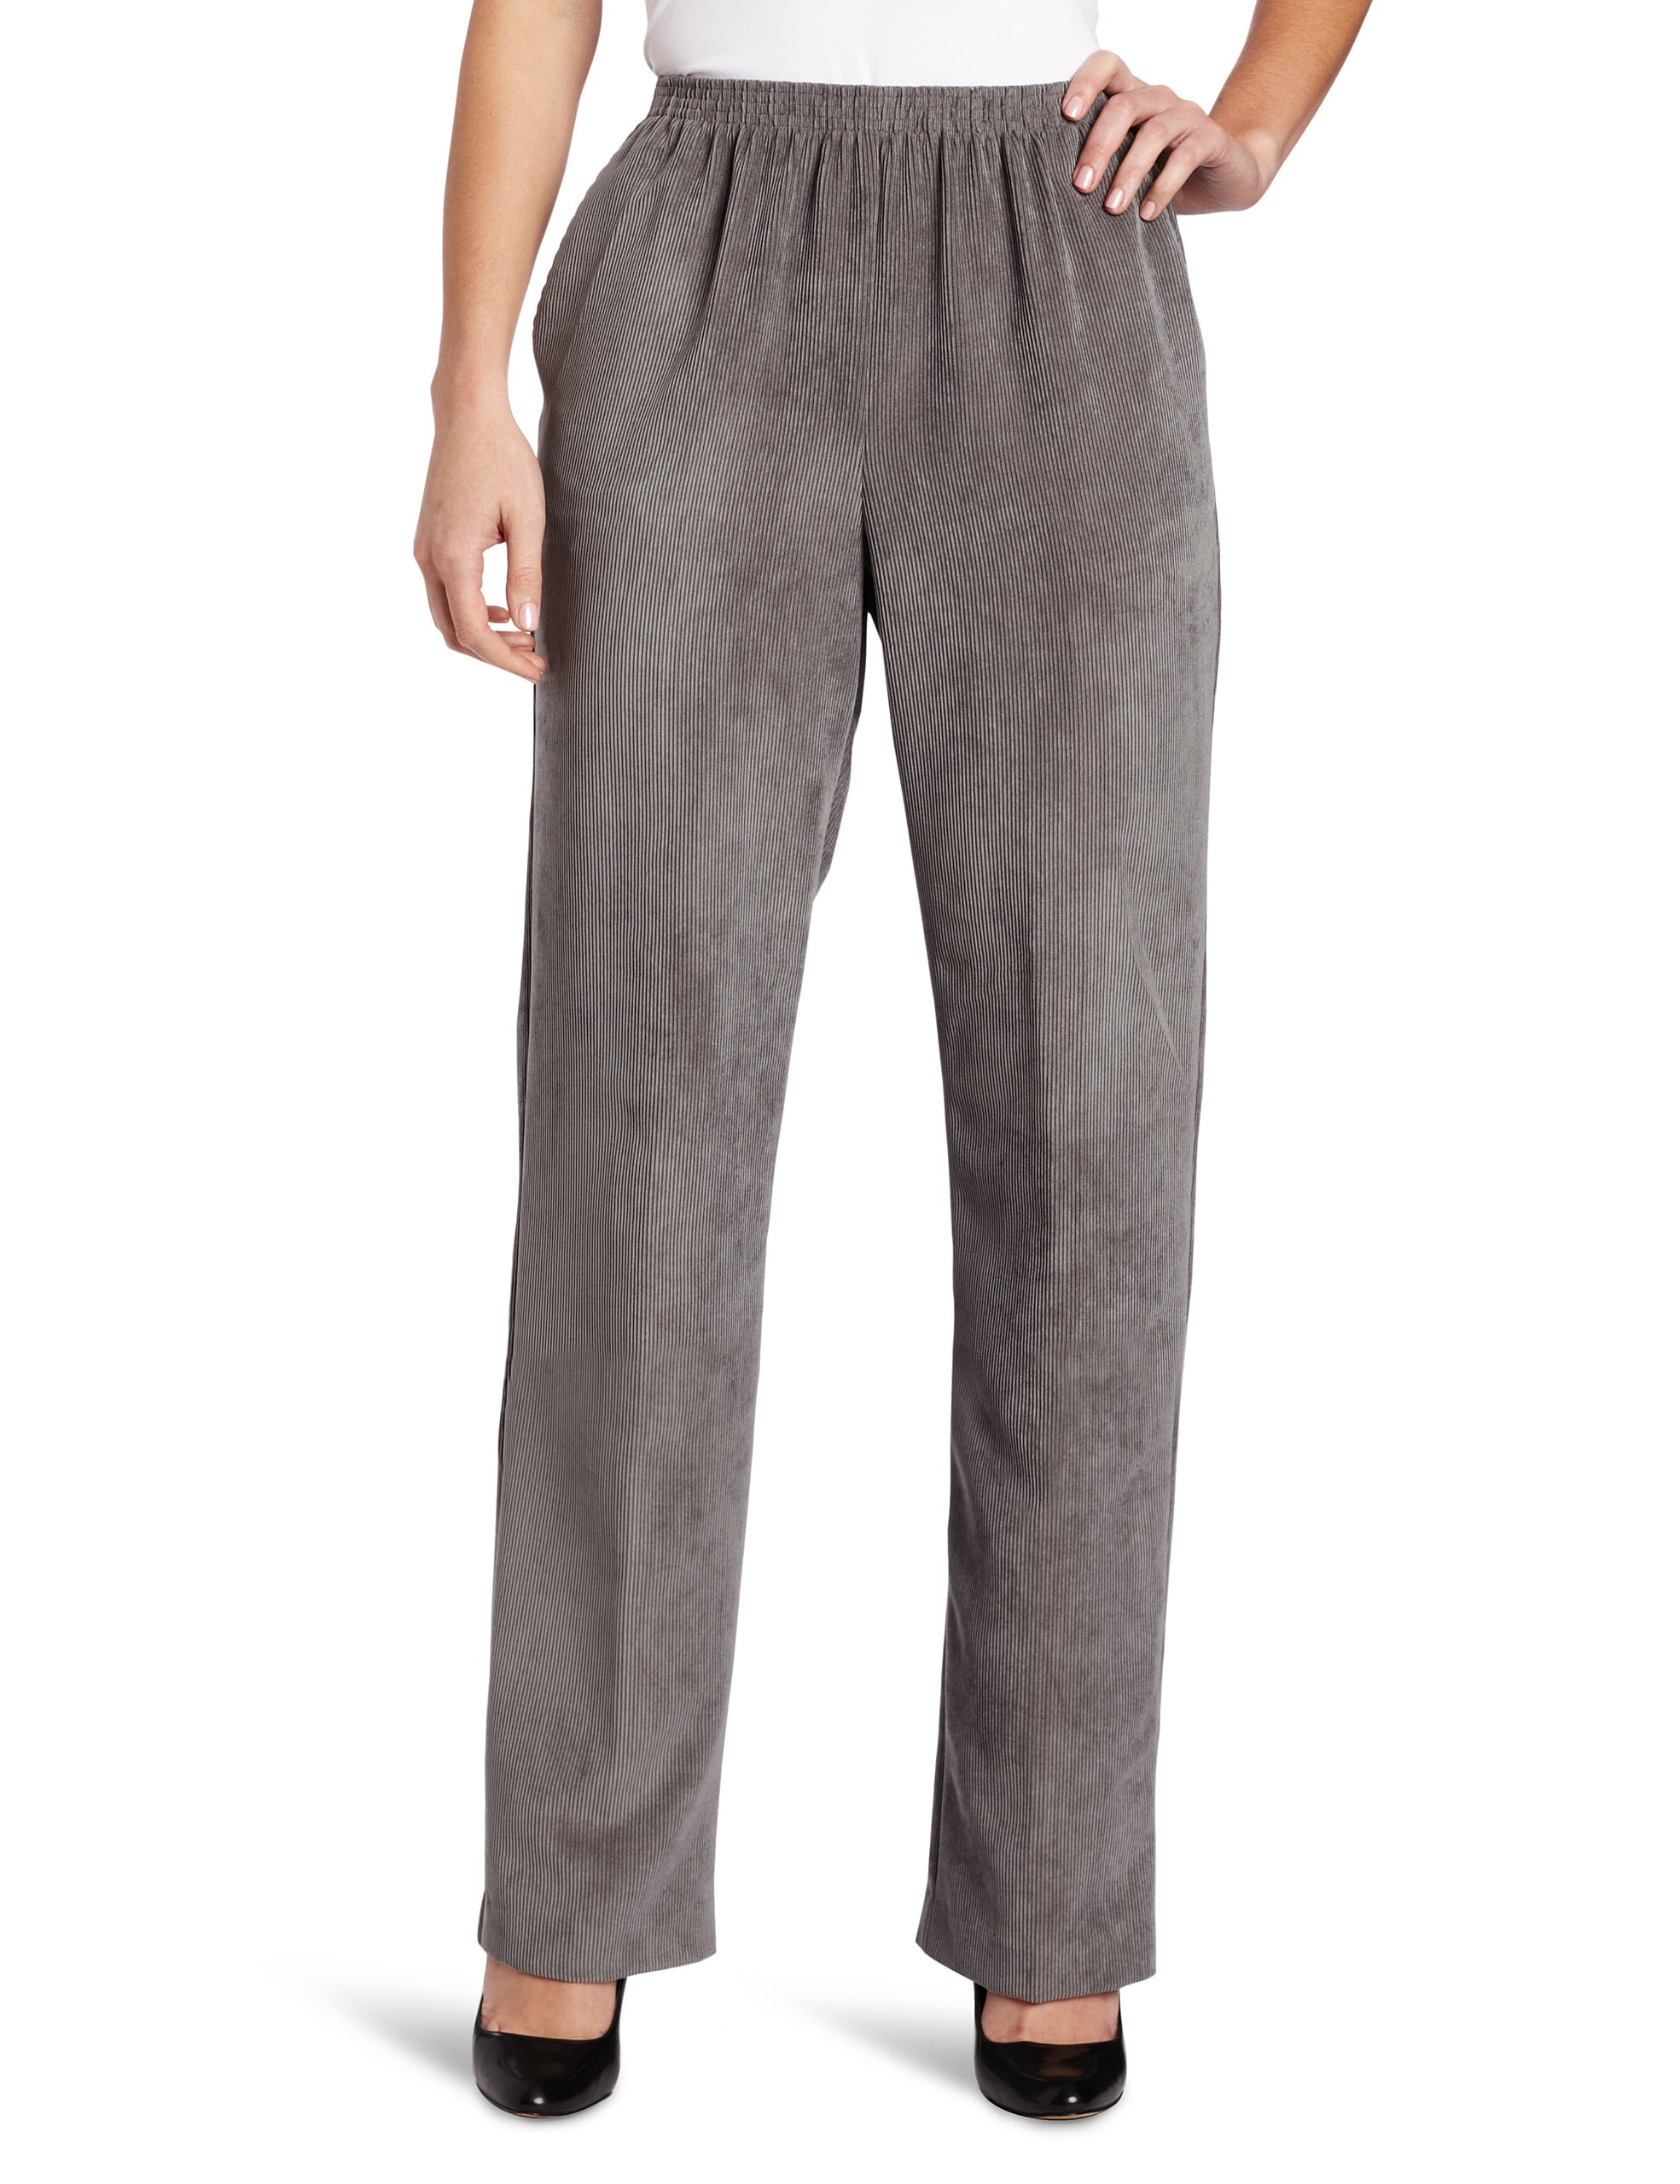 Alfred Dunner - Alfred Dunner Women's Proportioned Medium Pant, Grey ...